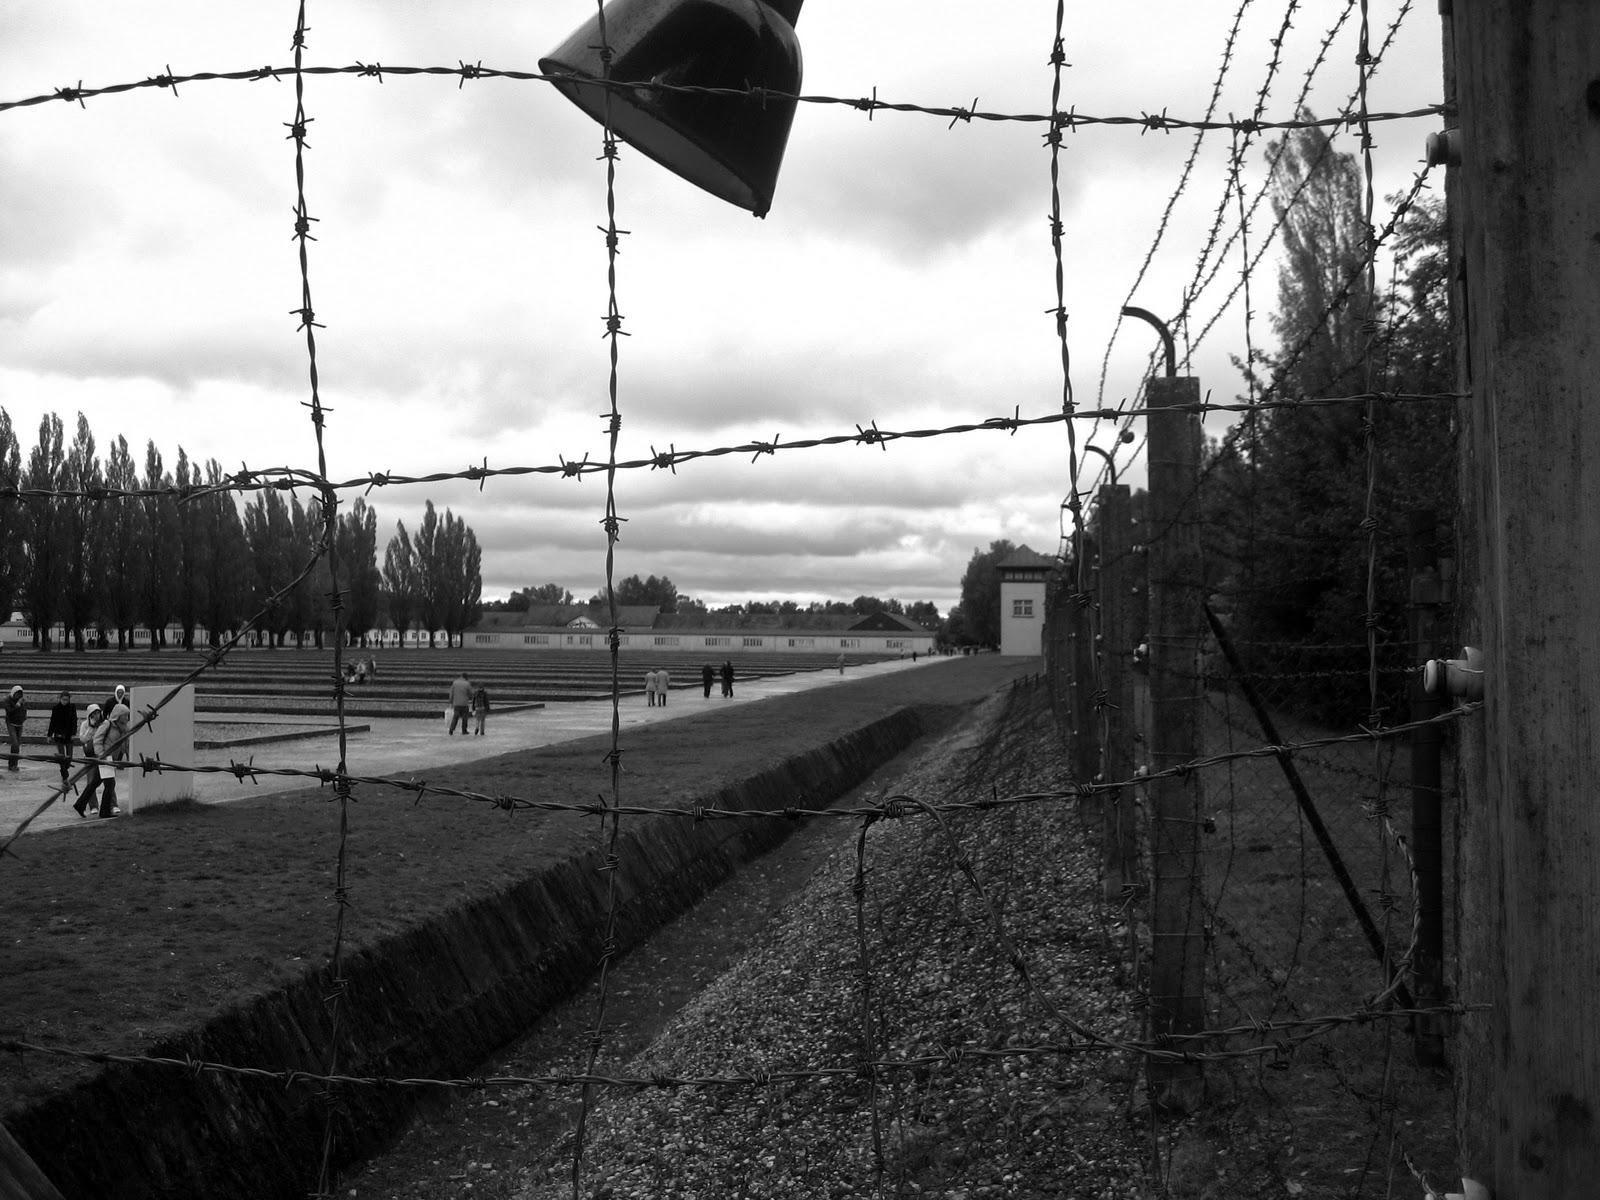 A Picture a Day: Dachau: The First Concentration Camp